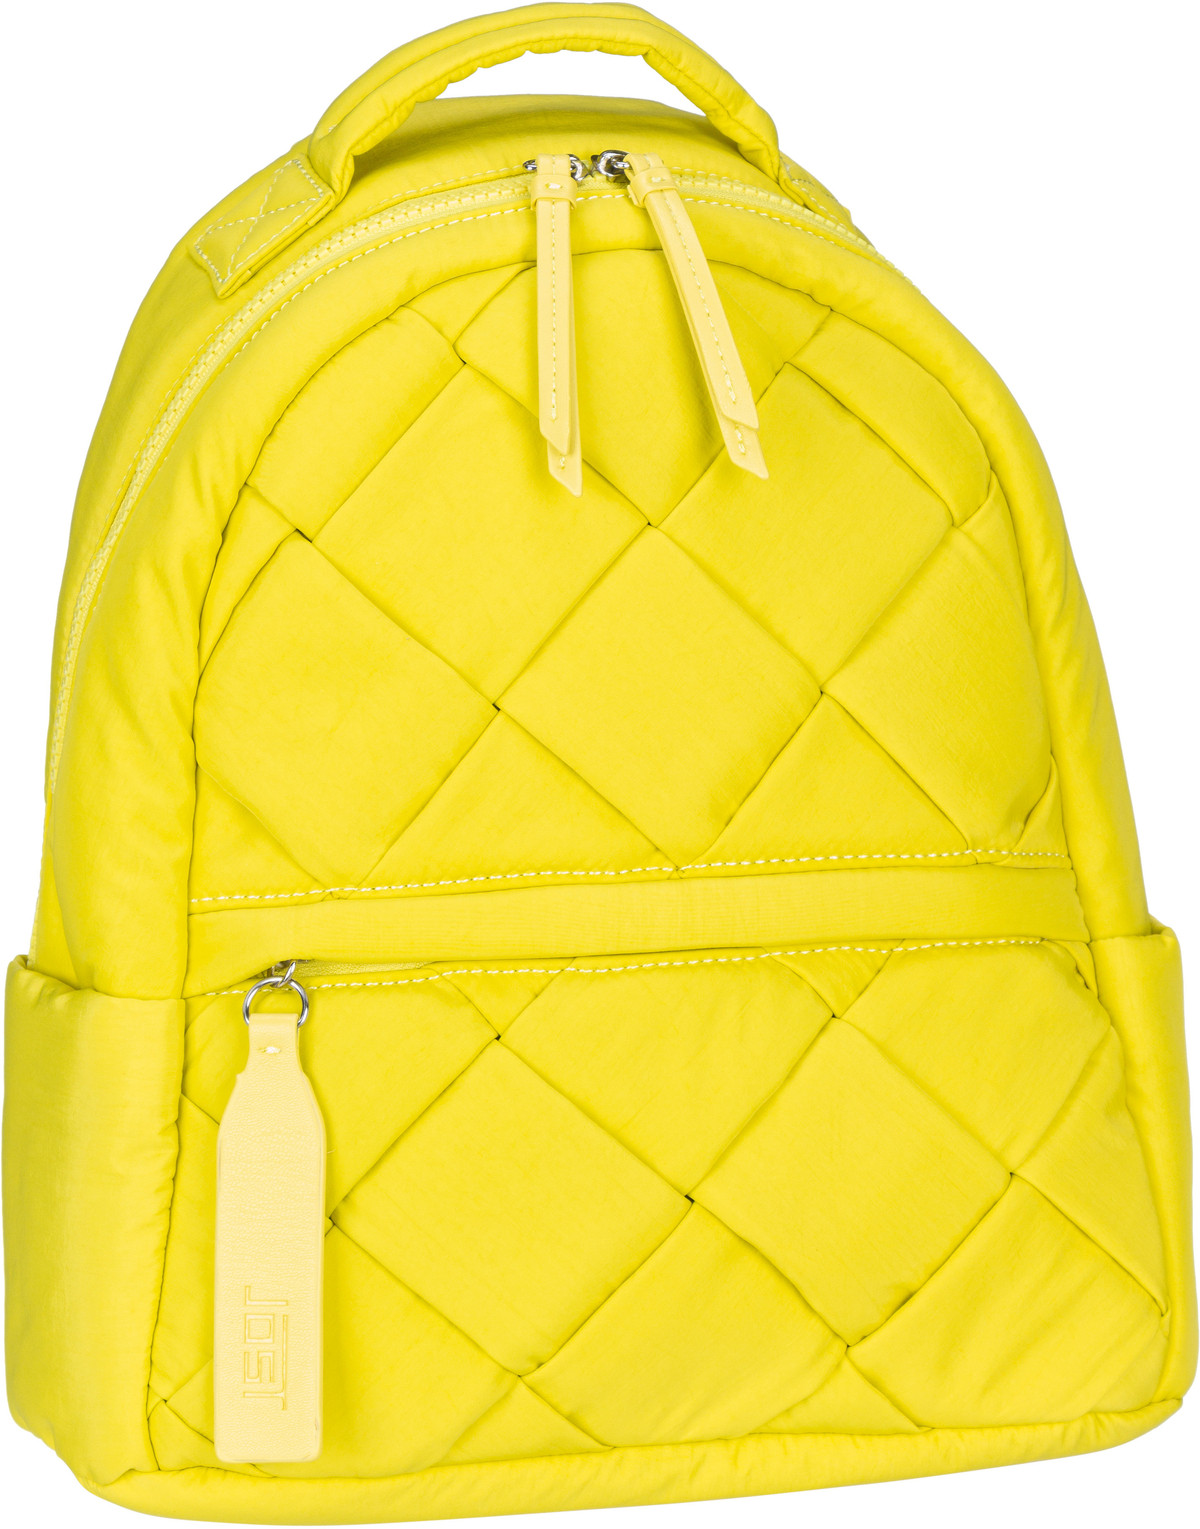 Jost Nora Daypack - Lime